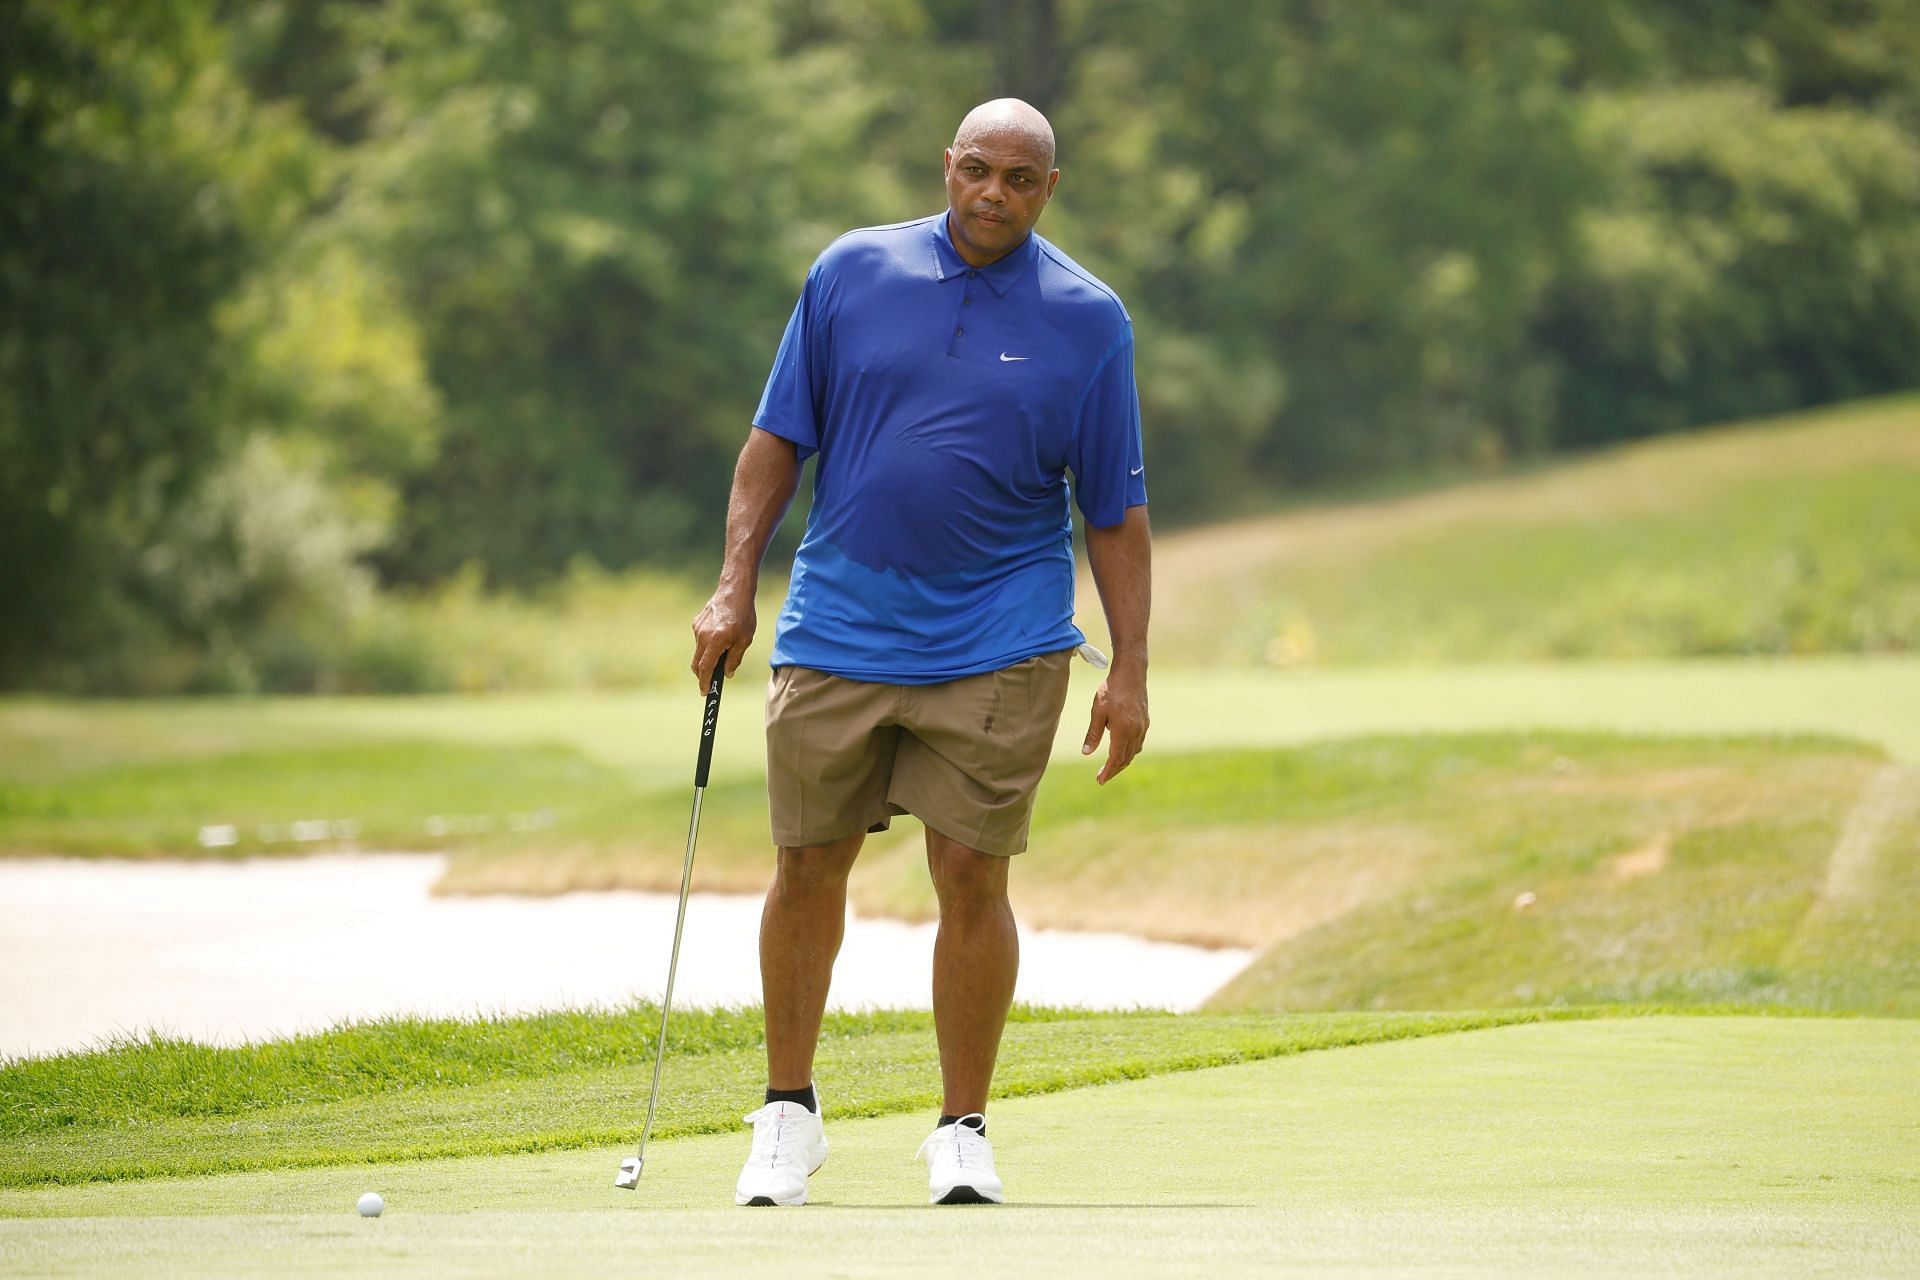 Charles Barkley Net Worth in 2023 How Rich is He Now? - News